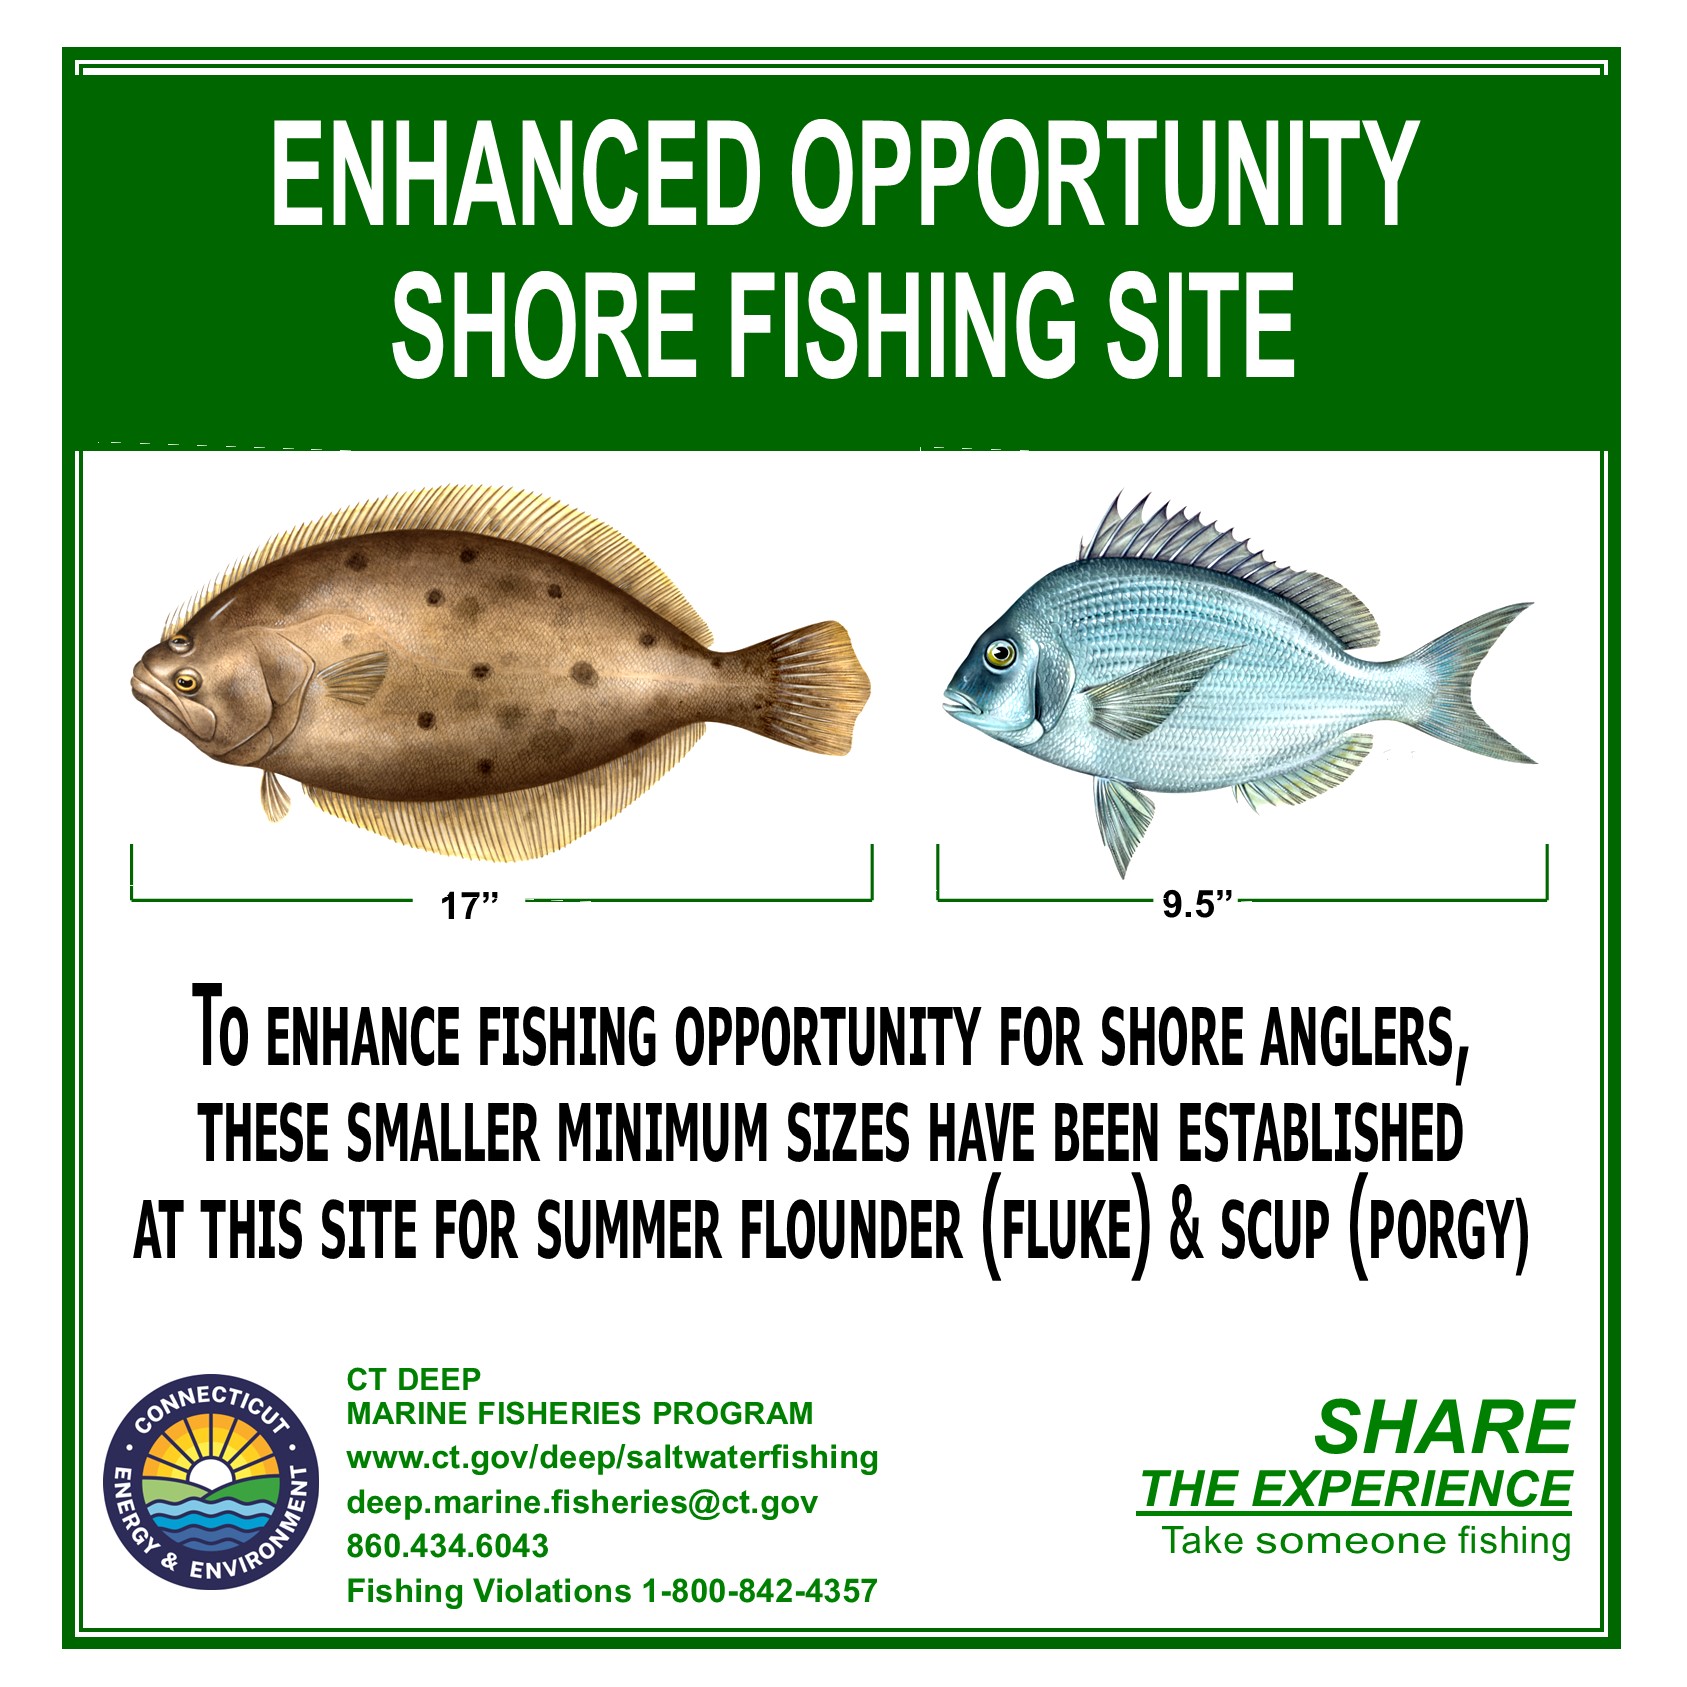 Sign for Enhanced Opportunity Shore Fishing Site that shows the minimum sizes for fluke and porgy.